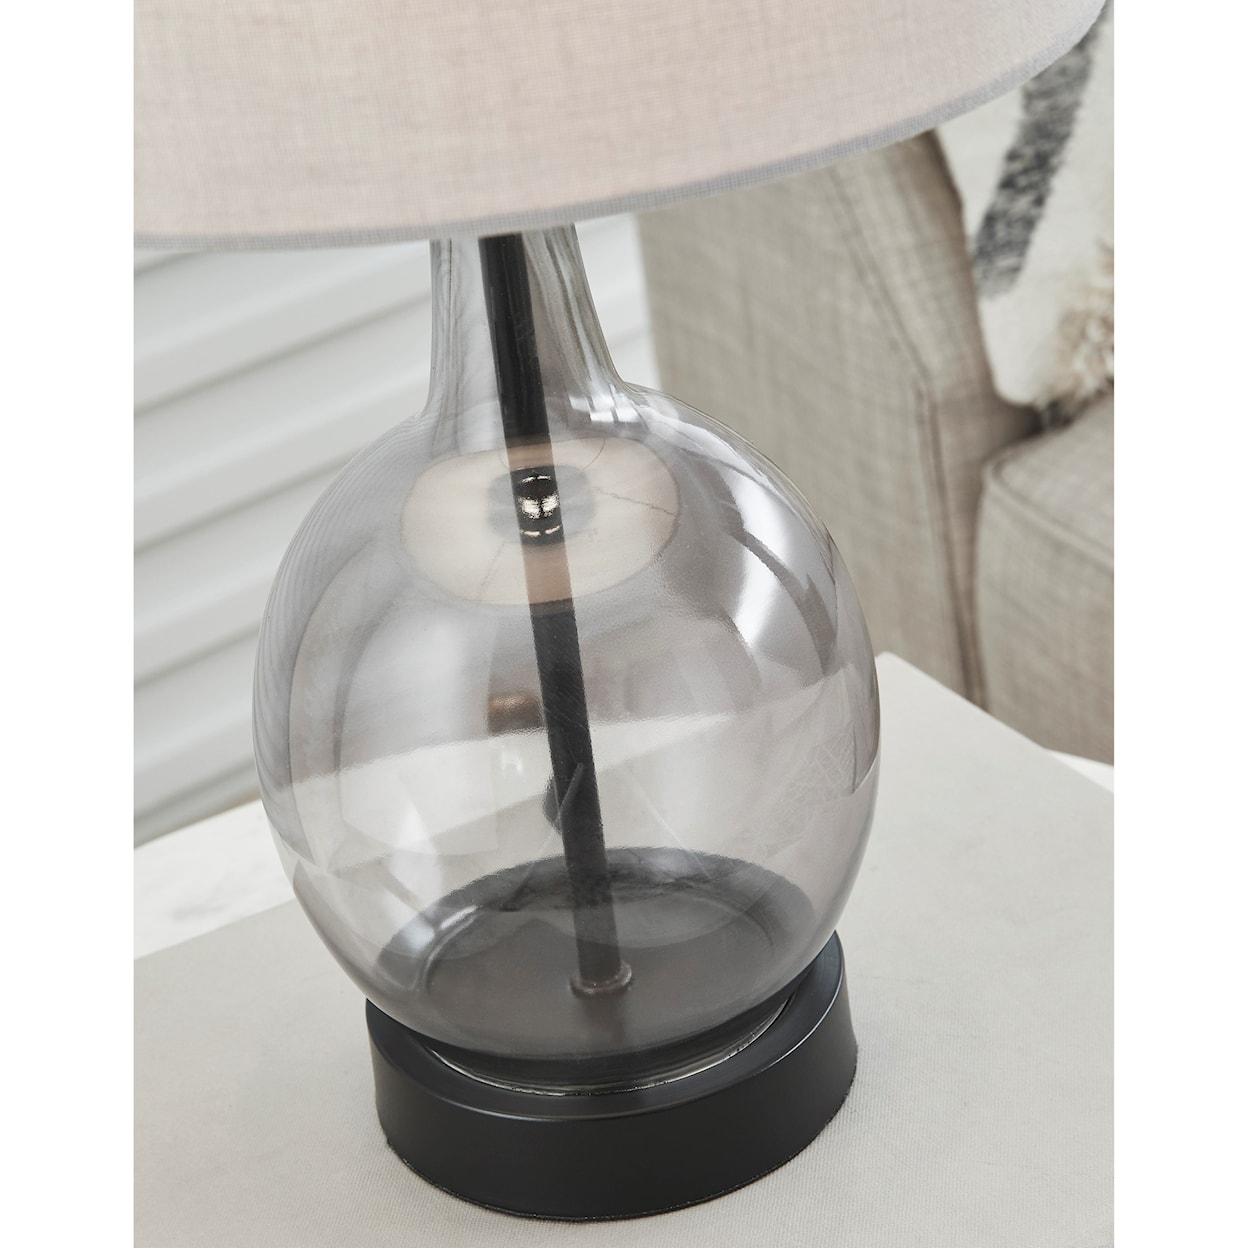 StyleLine Lamps - Casual Arlomore Gray Glass Table Lamp